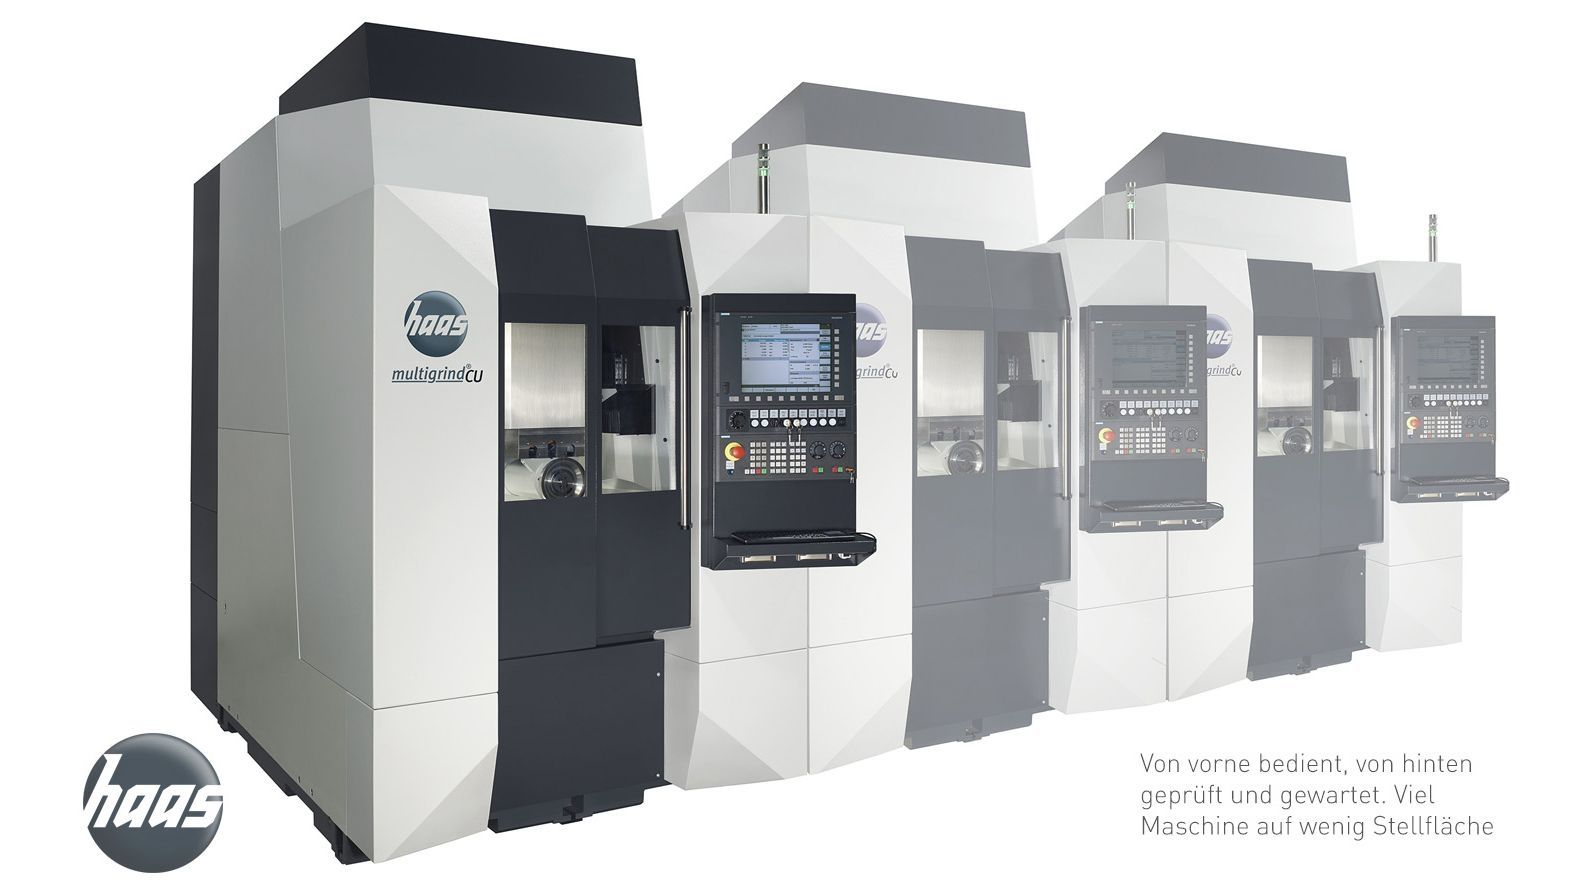 Haas Multigrind CU several machines on a small area